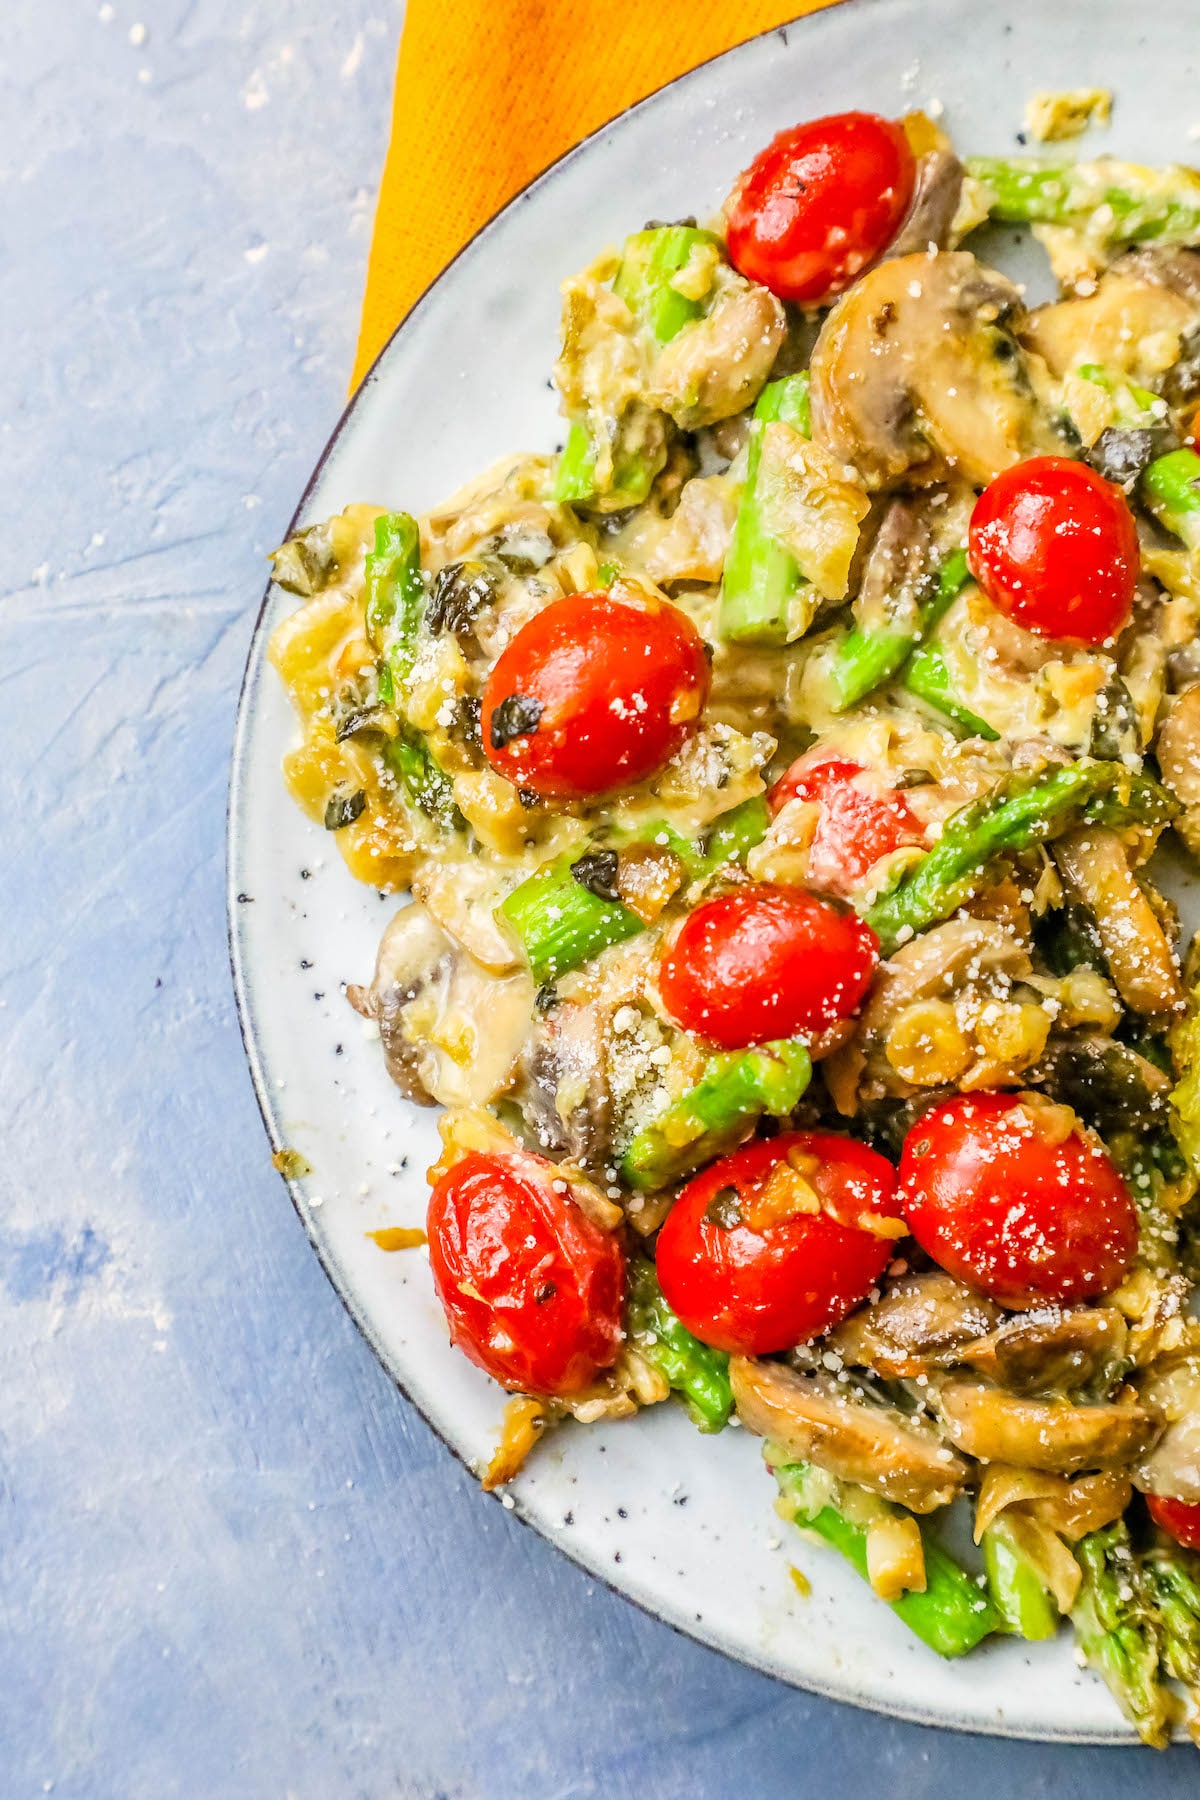 A cheesy and creamy skillet vegetable side dish featuring asparagus, mushrooms, and tomatoes.